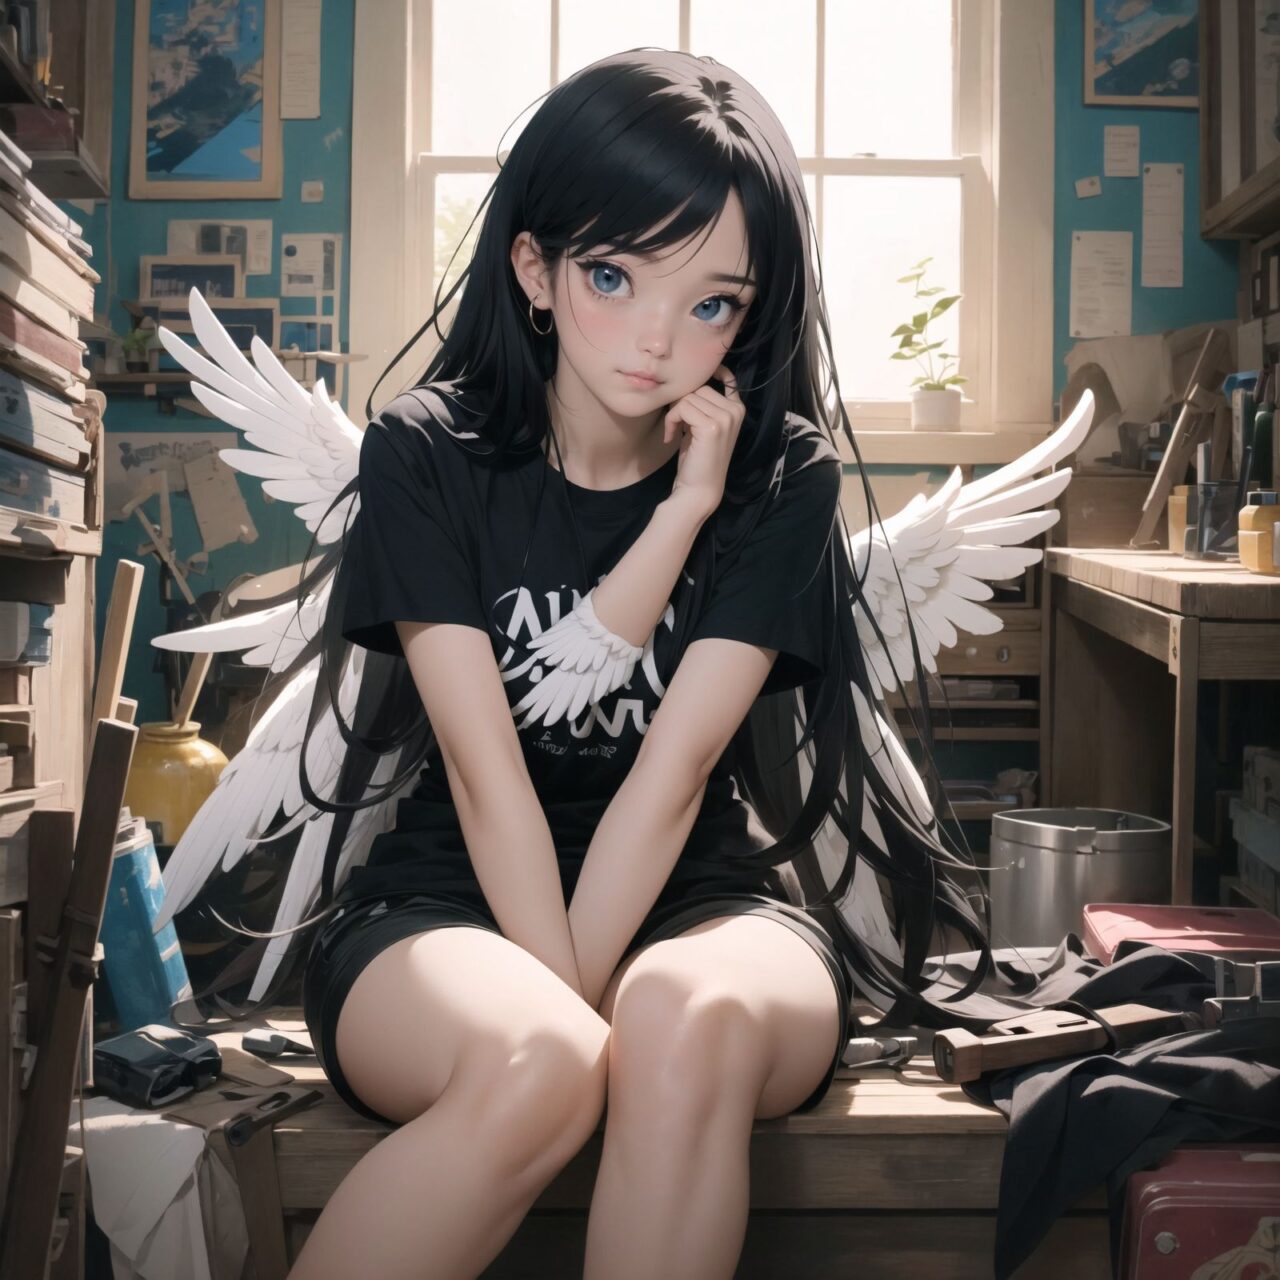 A detailed anime-style illustration of (an emo angel girl) with long black hair, sitting in a cluttered room. She is wearing a black t-shirt and shorts, with a listless expression. The background features various notes, tools, and a bright yellow wall with a blue sky visible through a window, creating a vibrant and eclectic atmosphere.